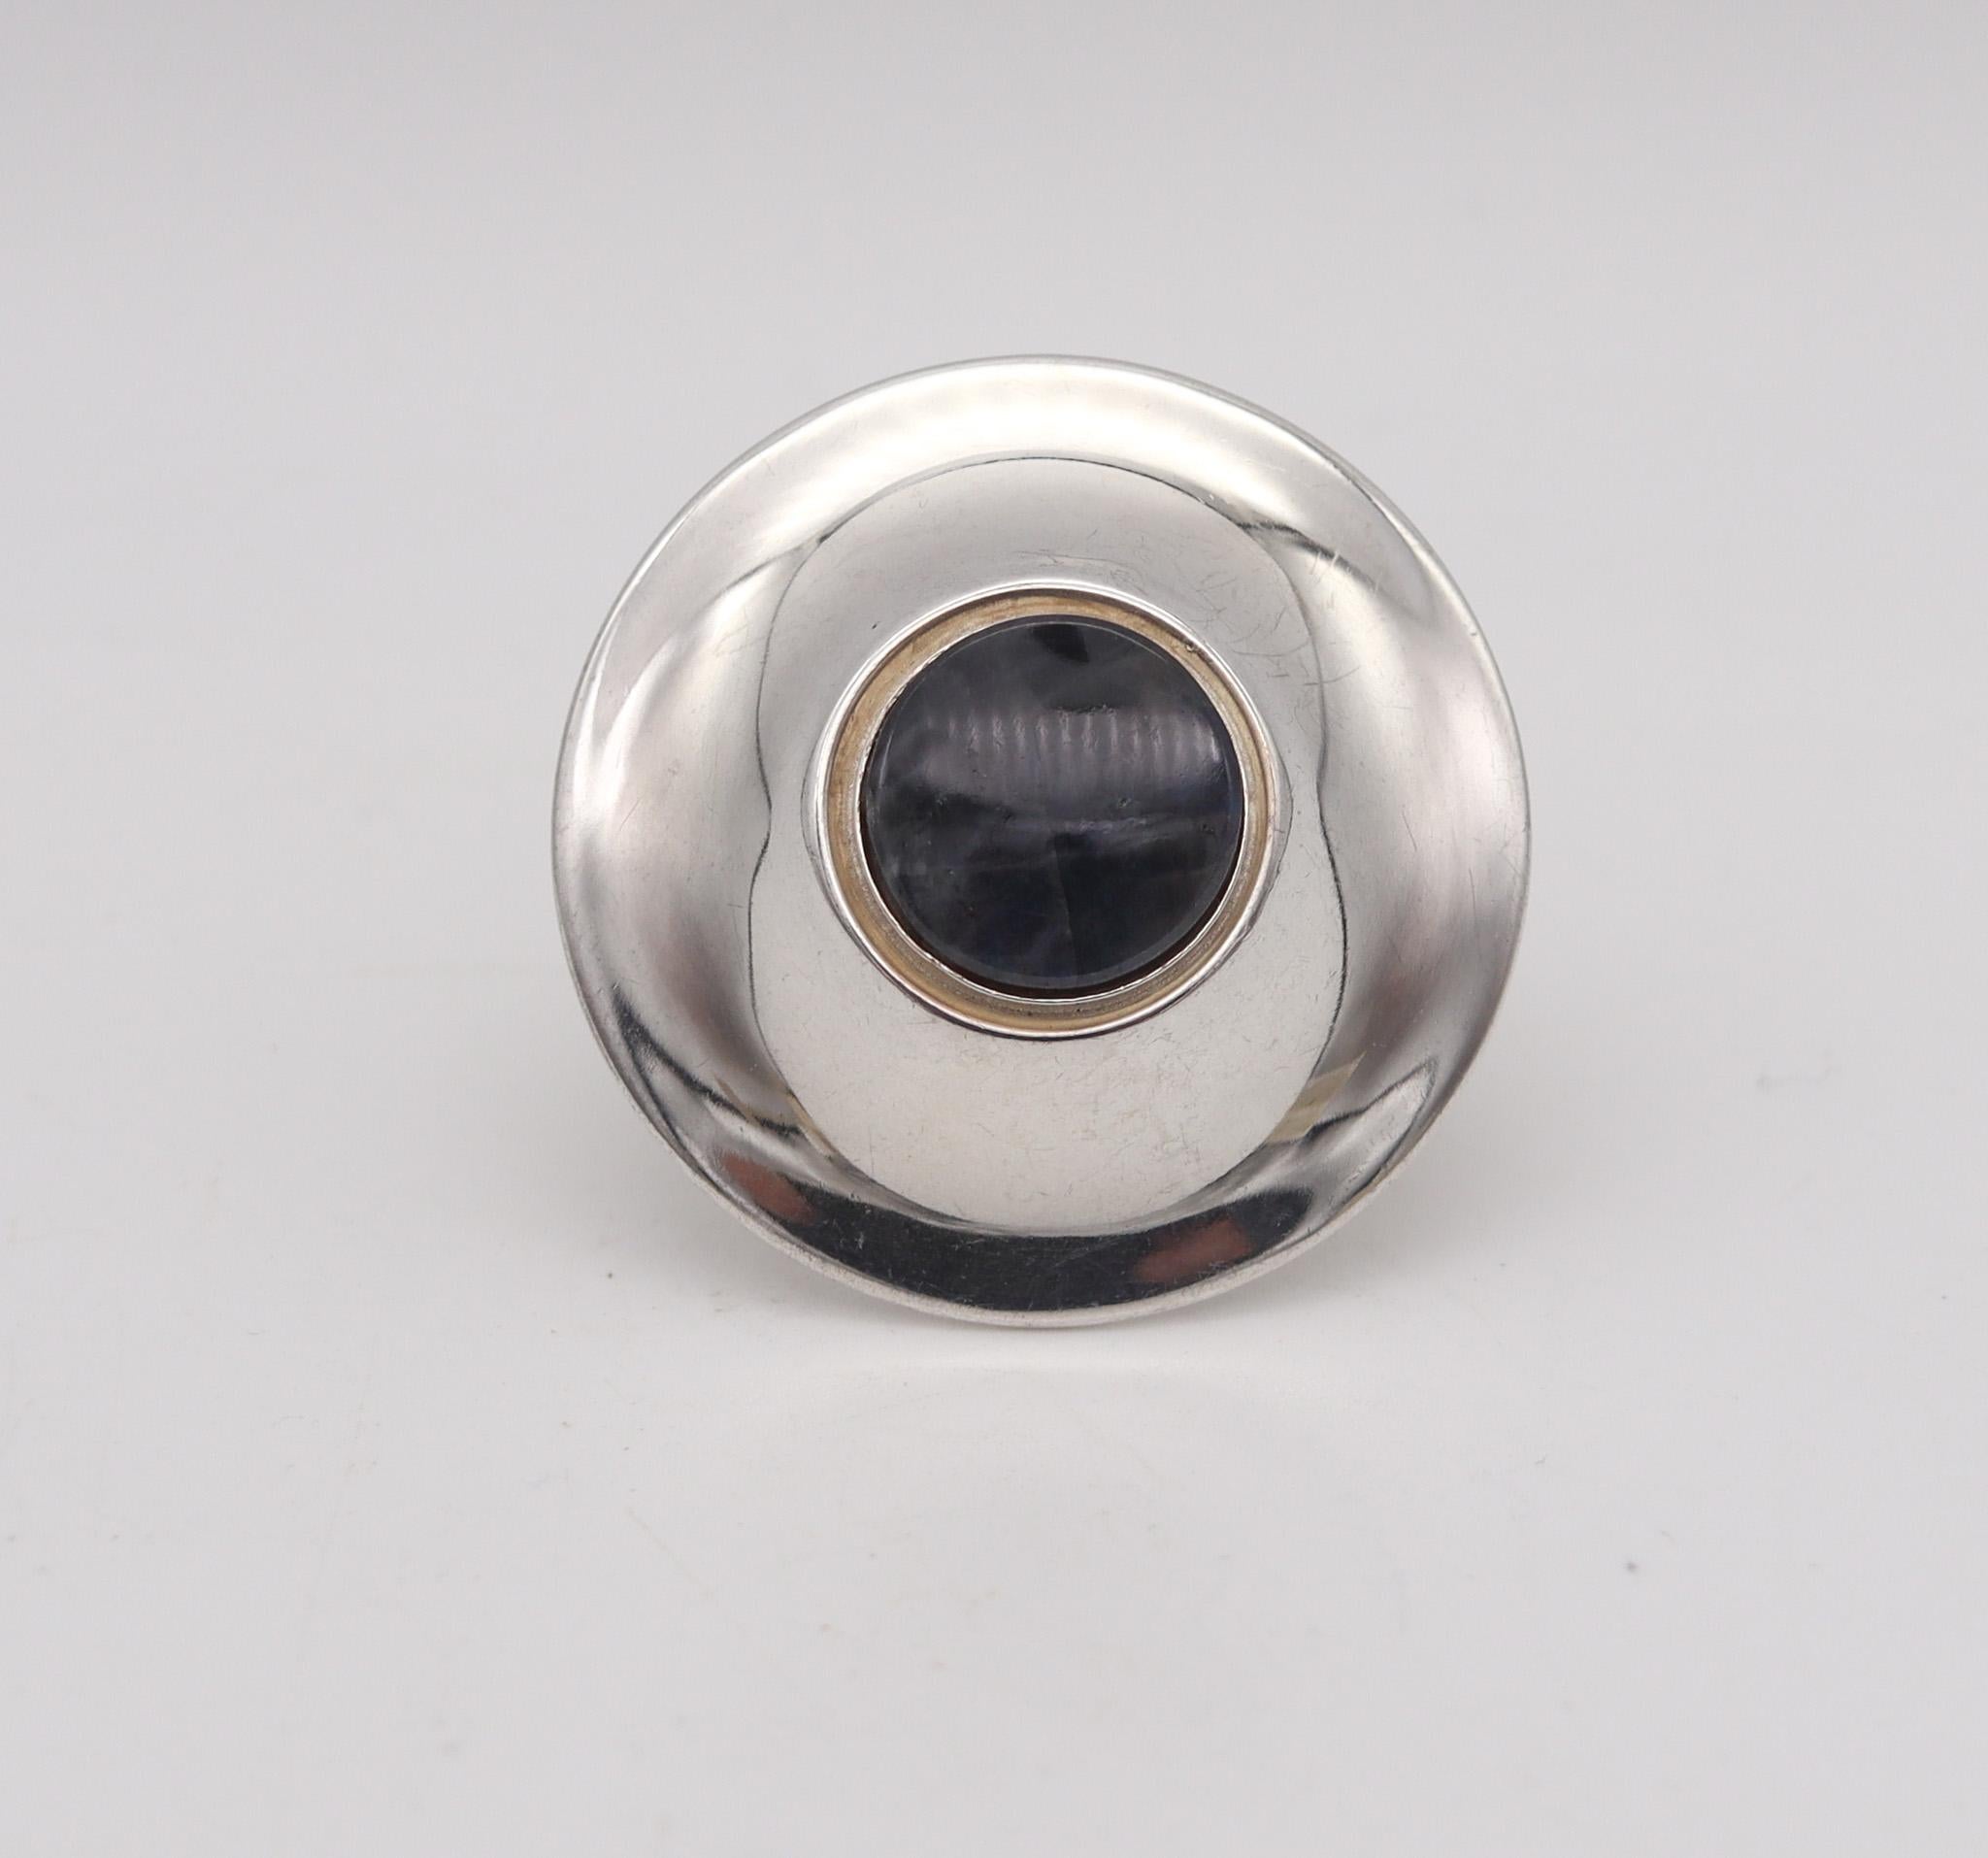 Modernist ring designed by Owe Johansson.

Fabulous modernist ring, created in Finland by the artist silversmith Owe Johansson, back in the 1973. This ring has been crafted in solid .925/.999 sterling silver with high polished finish. The upper